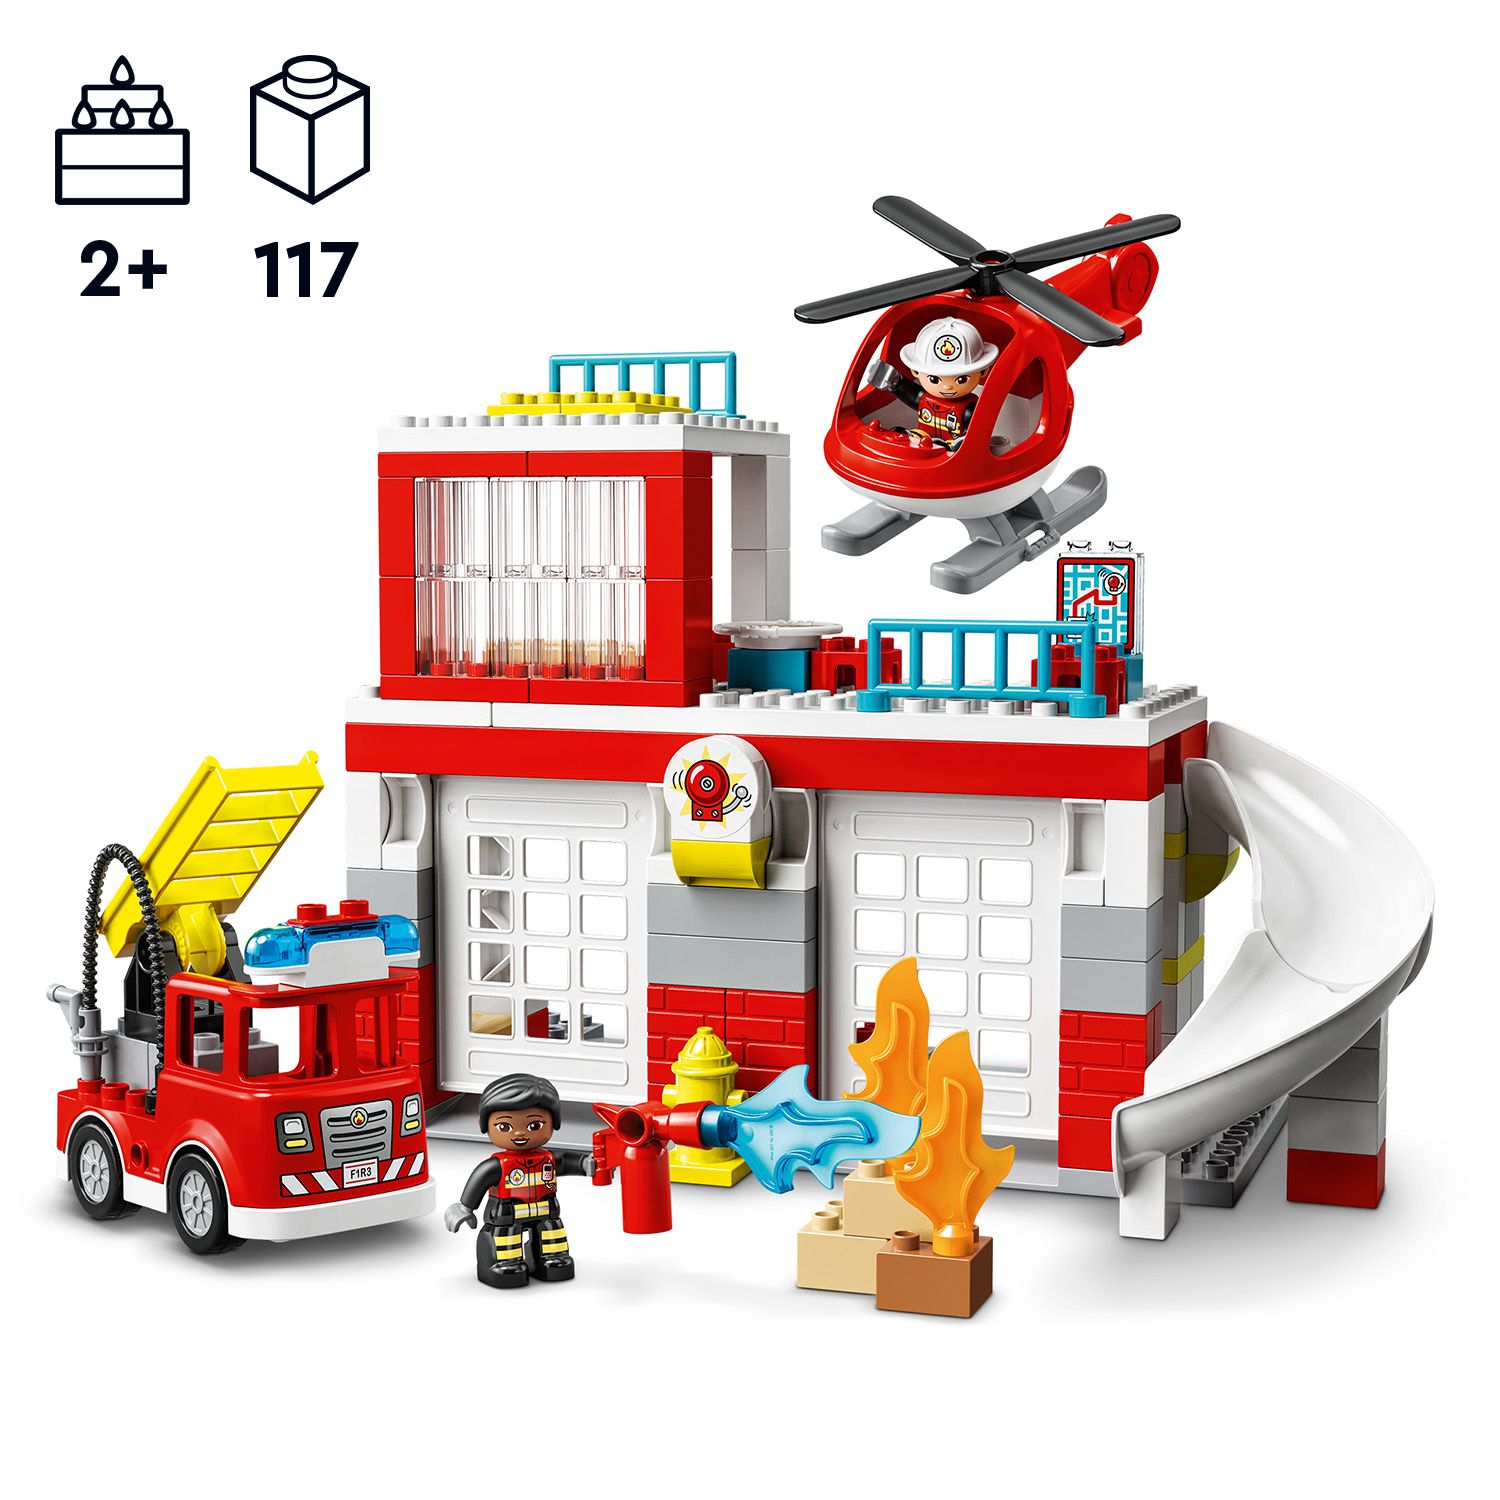 117-piece set packed with authentic details